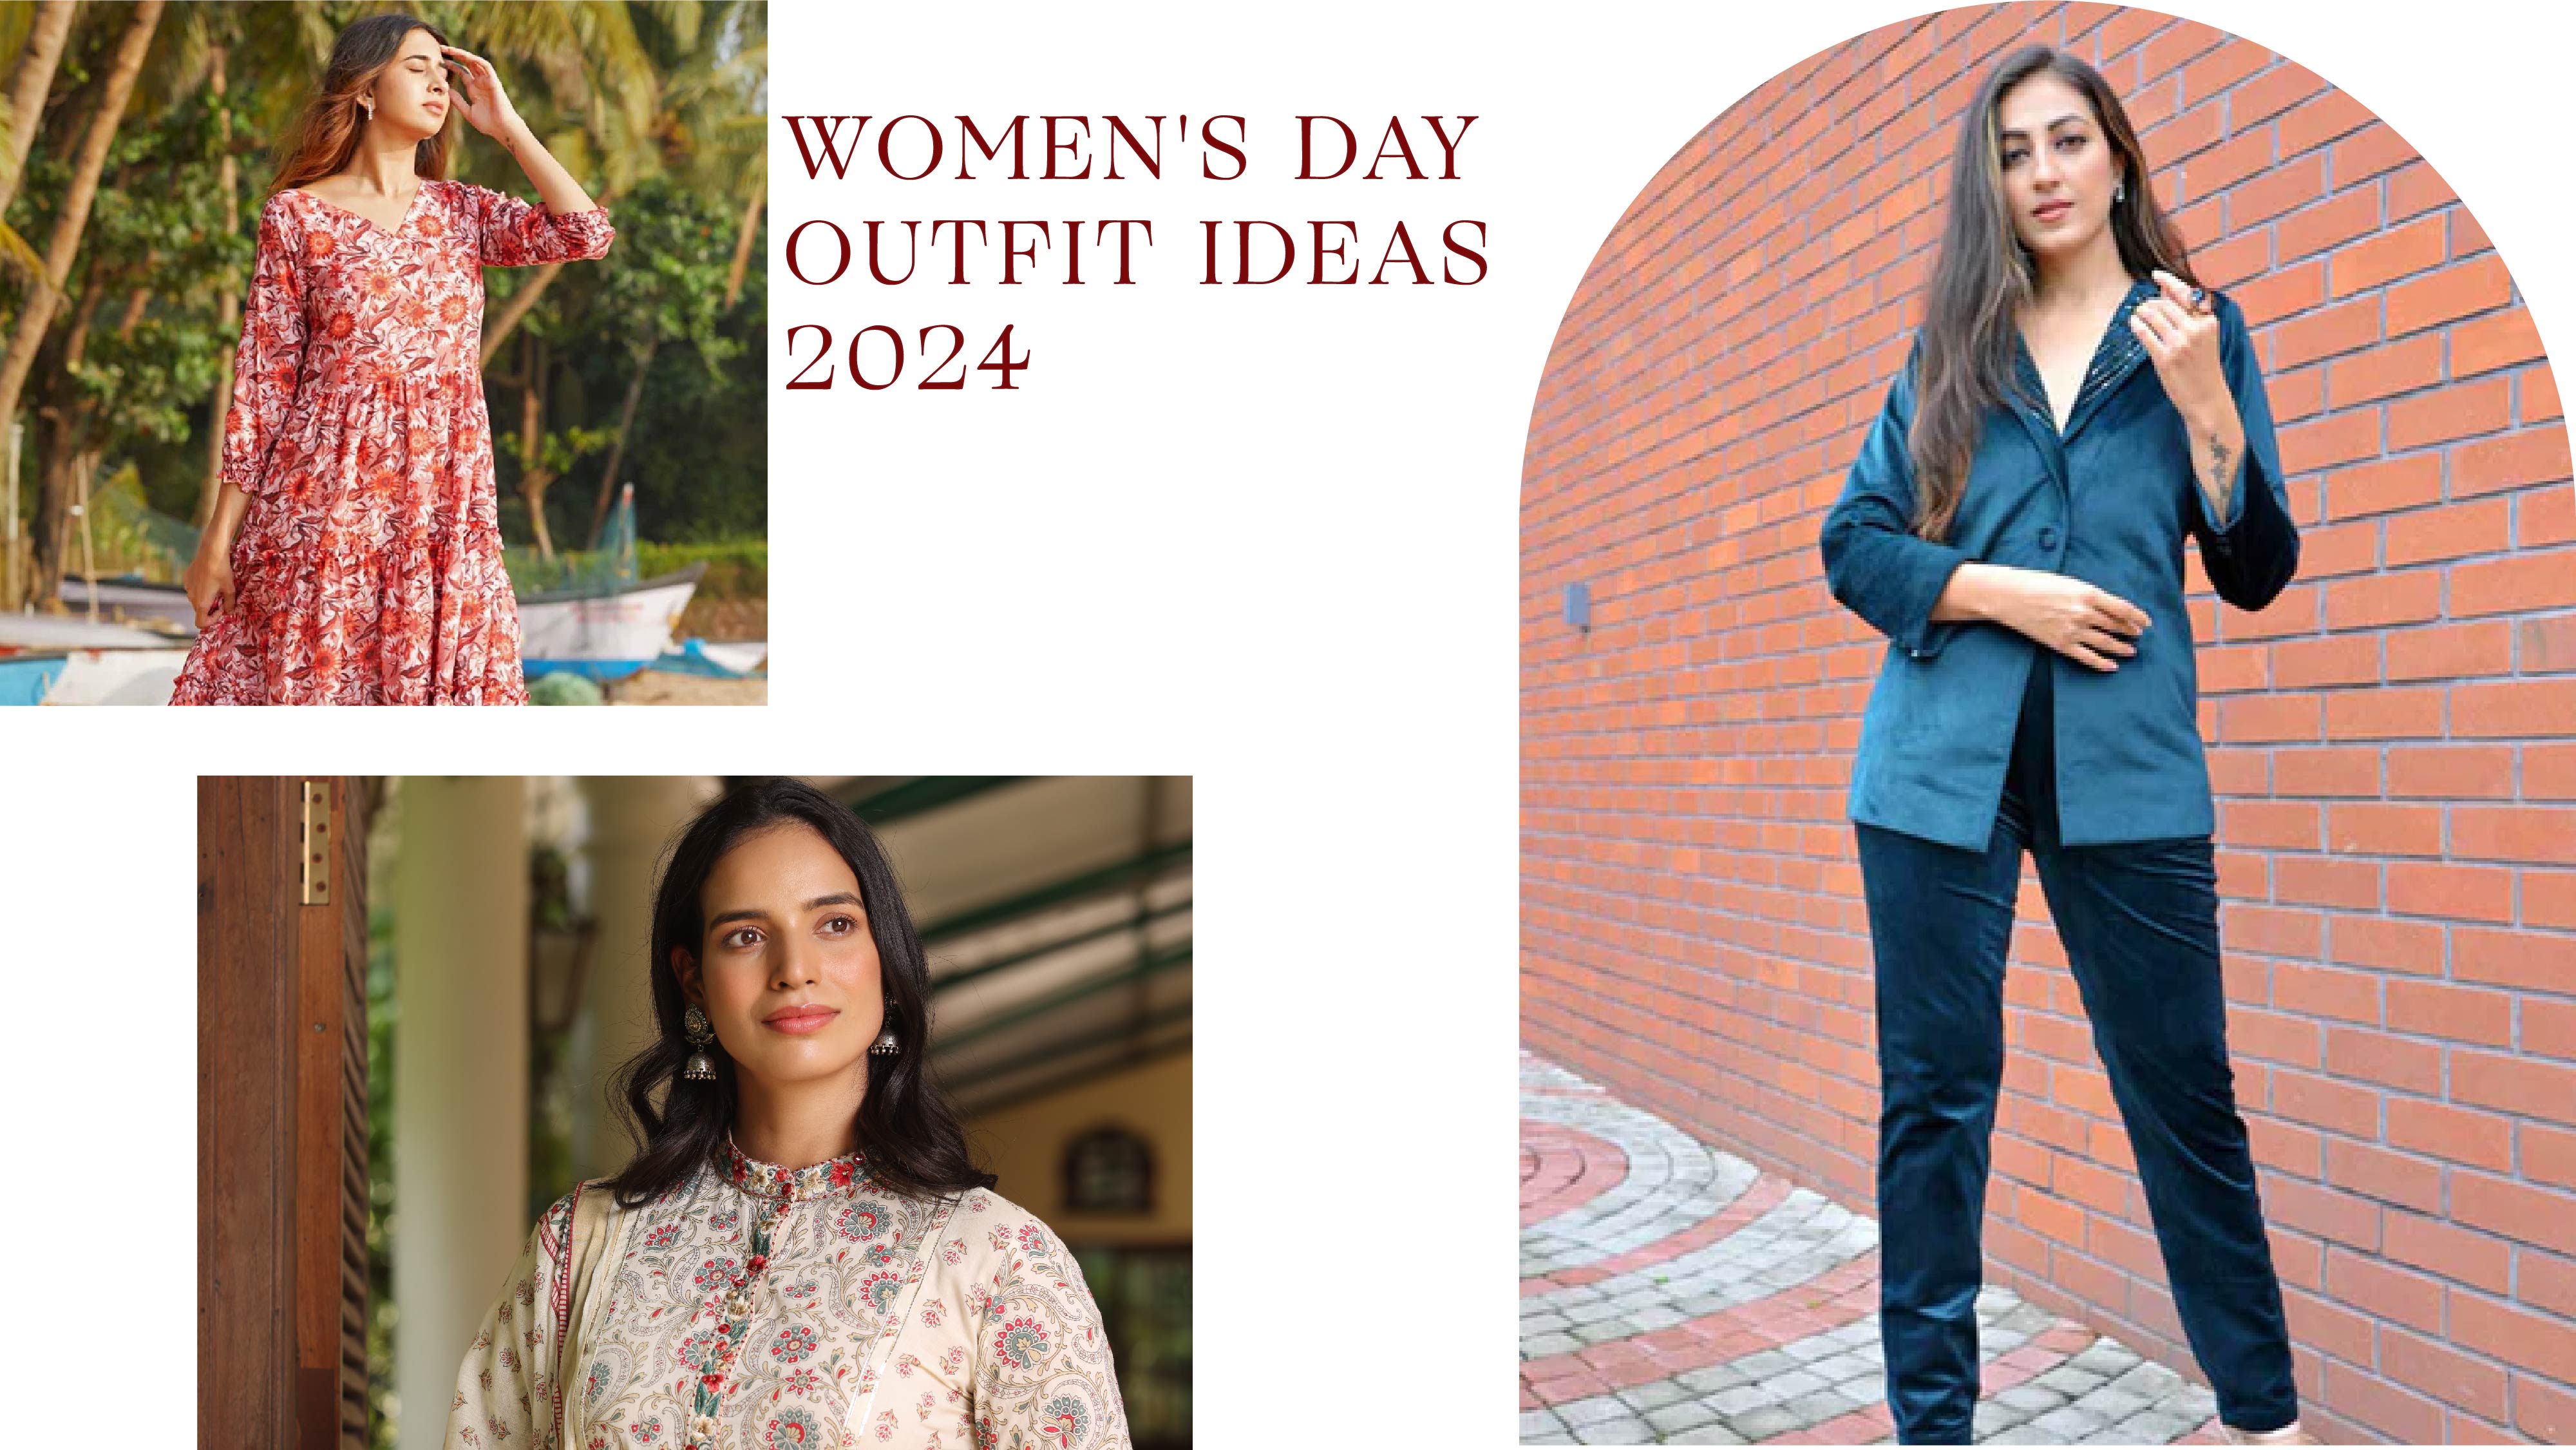 10 Elegant Women's Day Outfit Ideas 2024